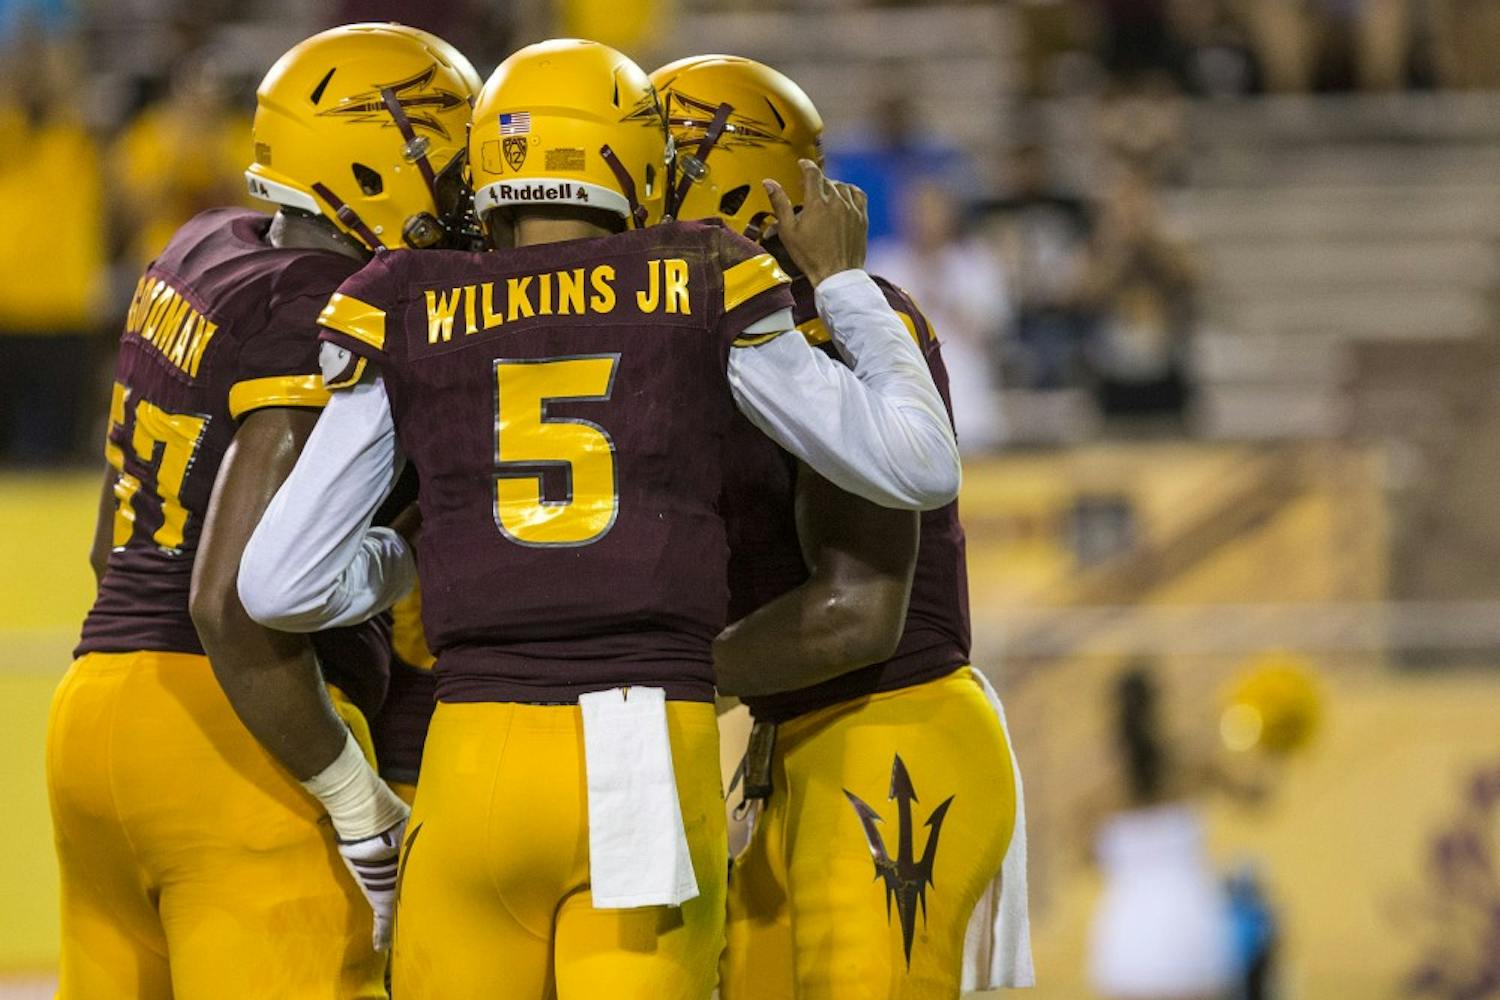 ASU players celebrate after a touchdown during a game against Northern Arizona University in Tempe, Arizona, on Sept. 3, 2016. The Sun Devils won the matchup, 44-13.